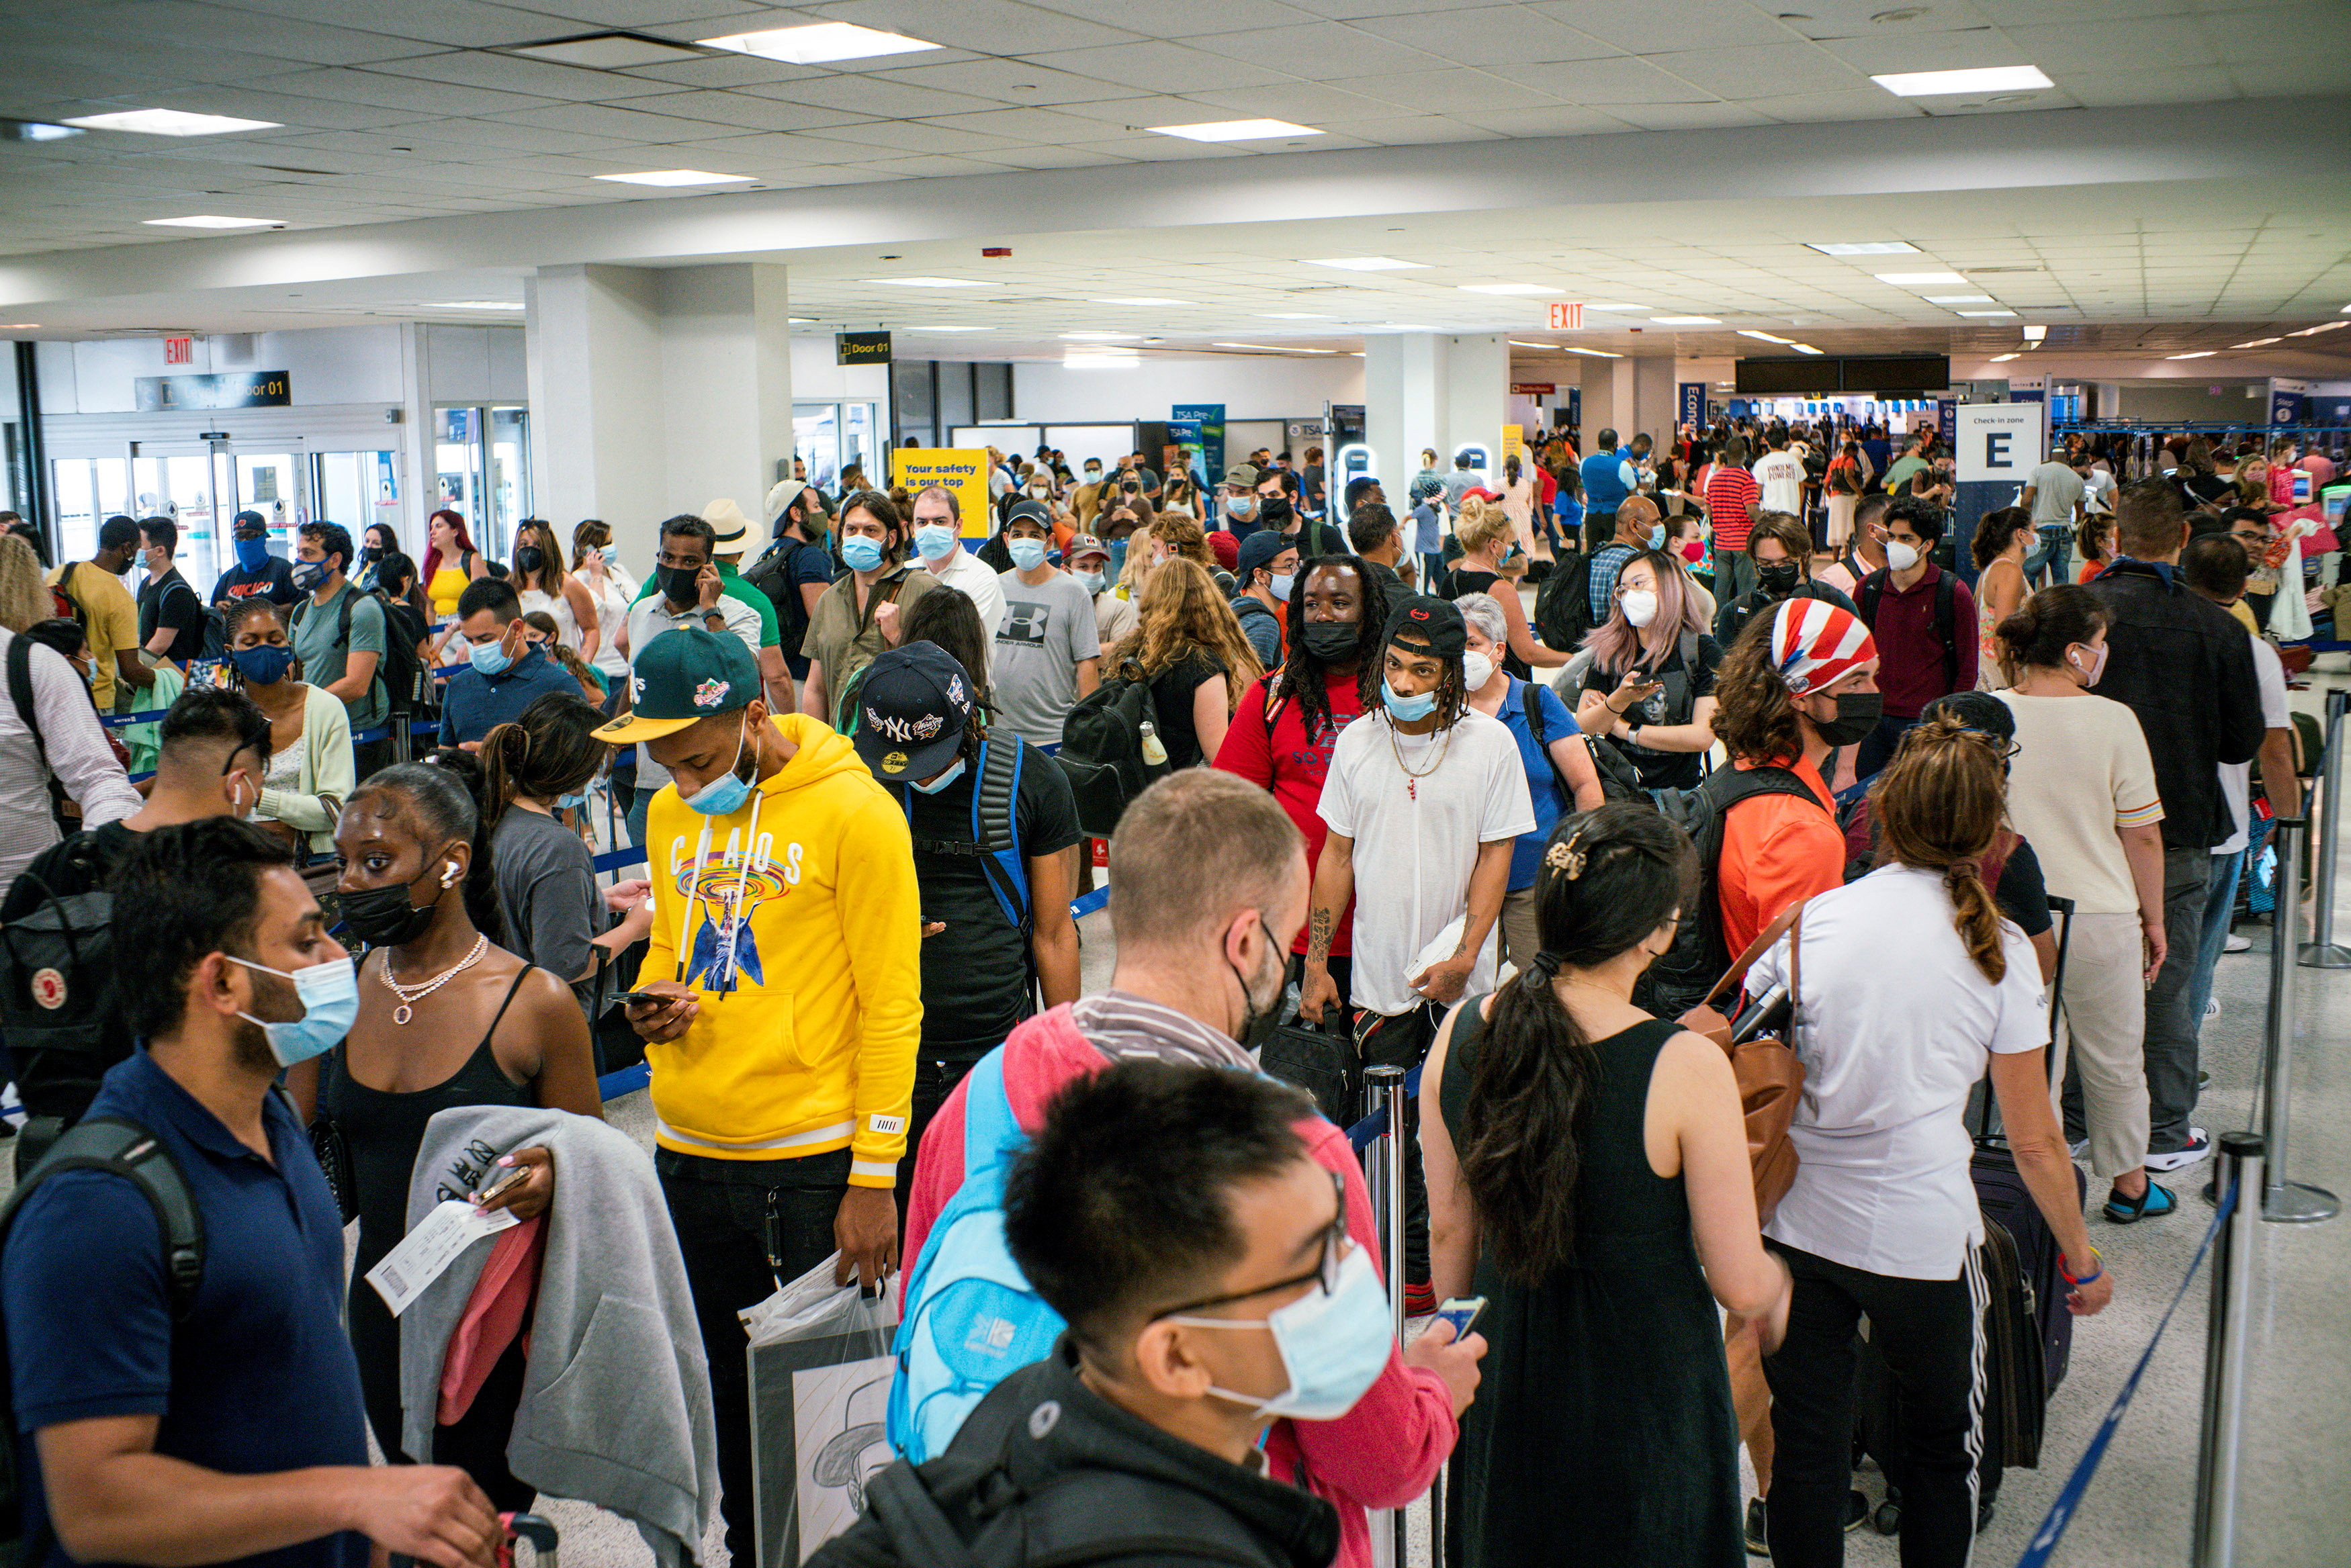 Travellers wait in line for immigration processing at the Newark Liberty International Airport, in Newark, New Jersey